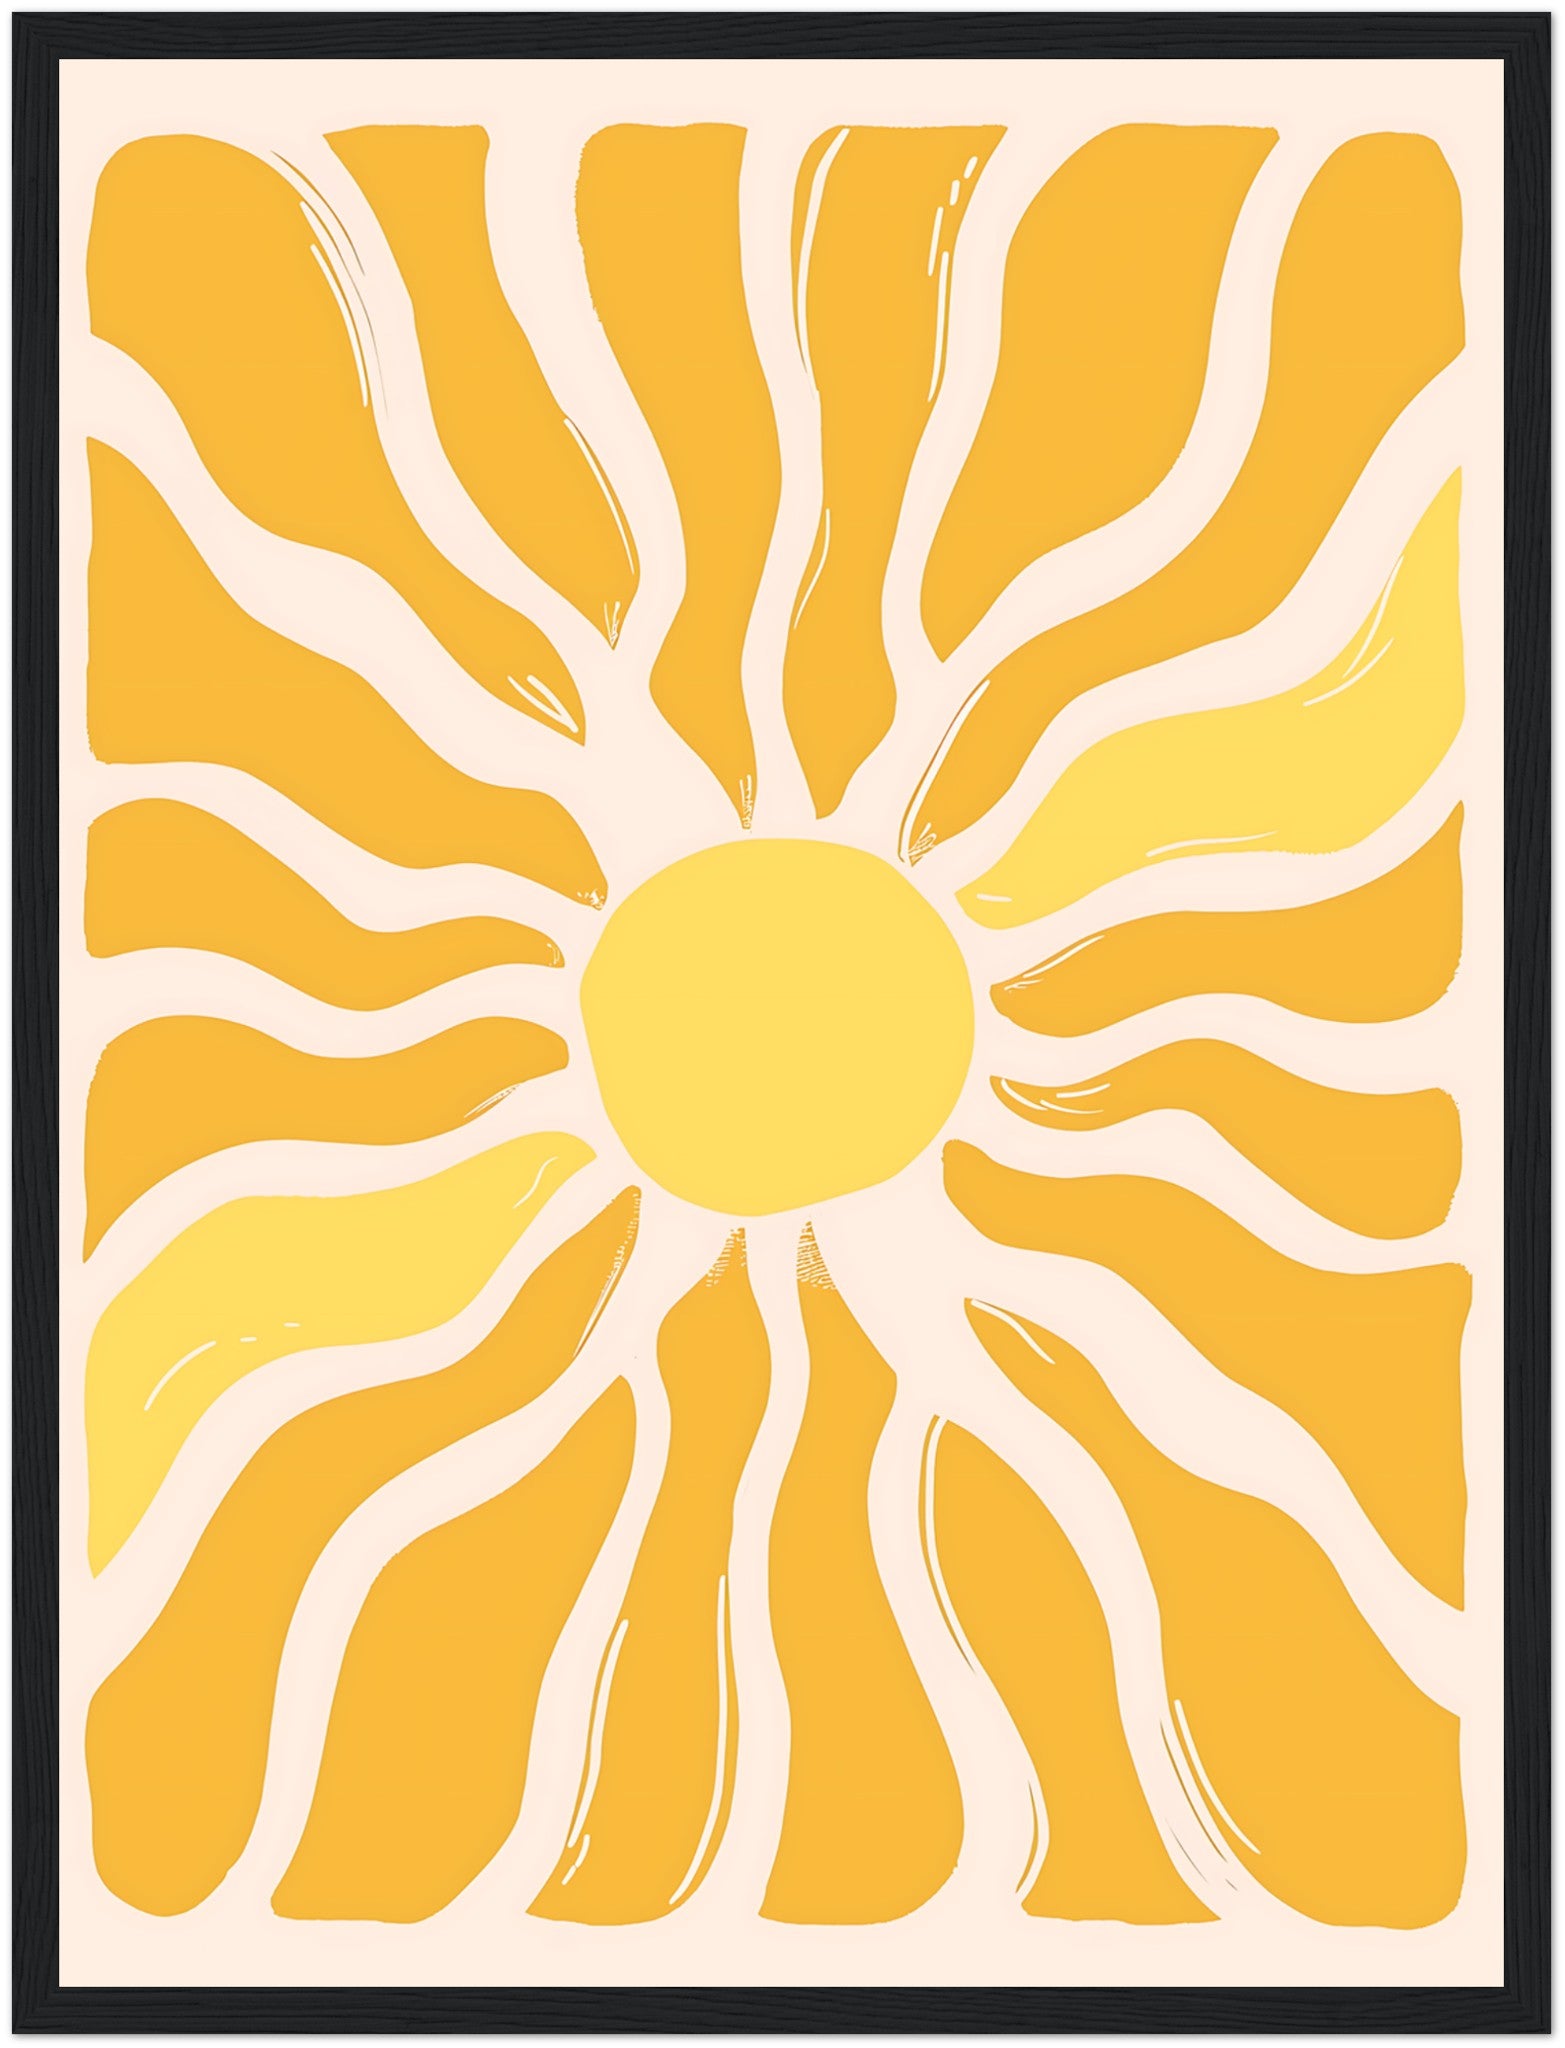 Abstract sunburst pattern with yellow and white rays on a framed canvas.